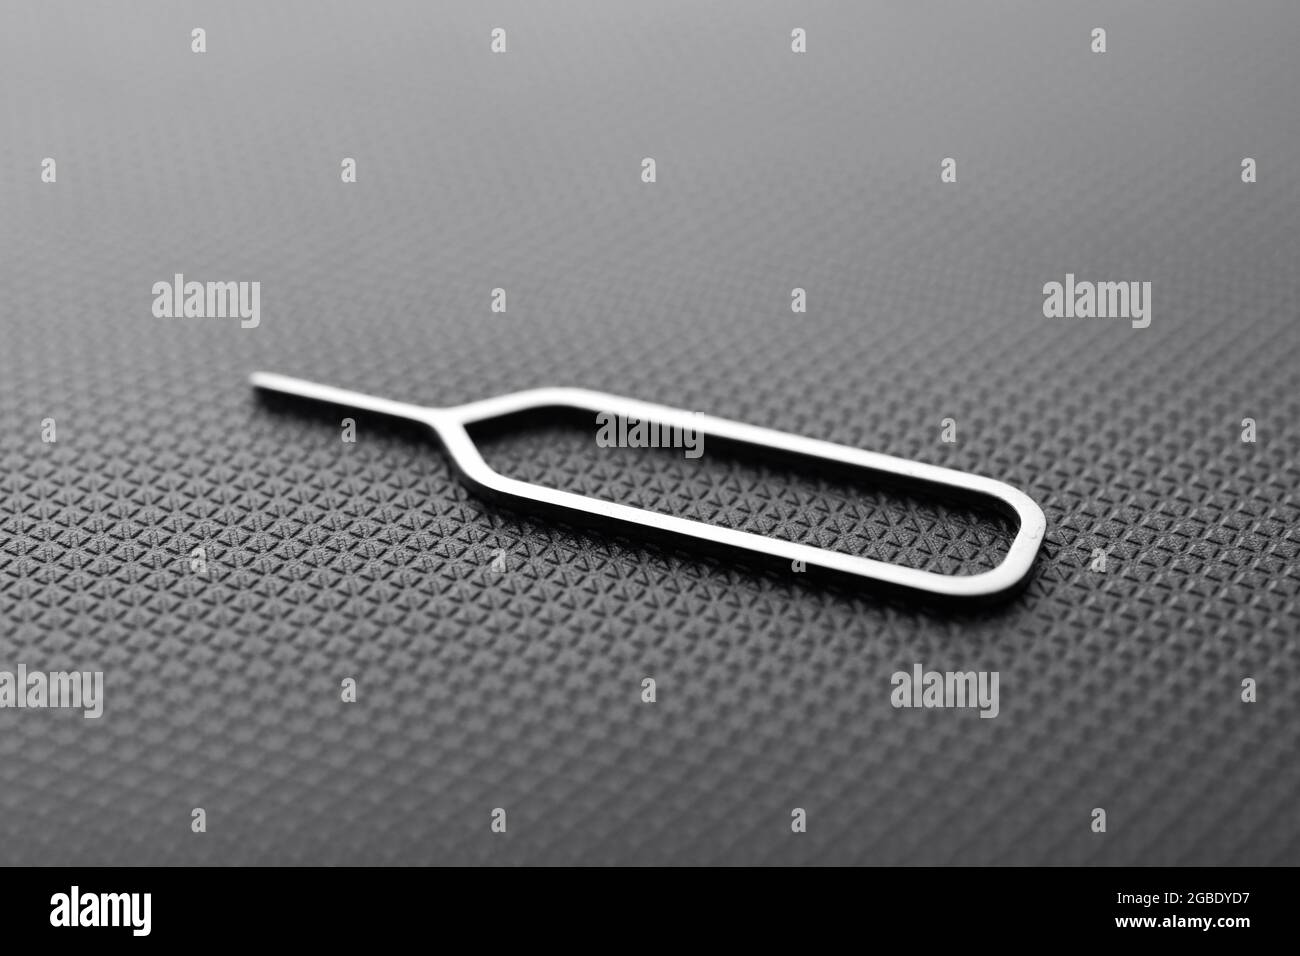 Sim Ejector Tool On Black Textured Background Stock Photo